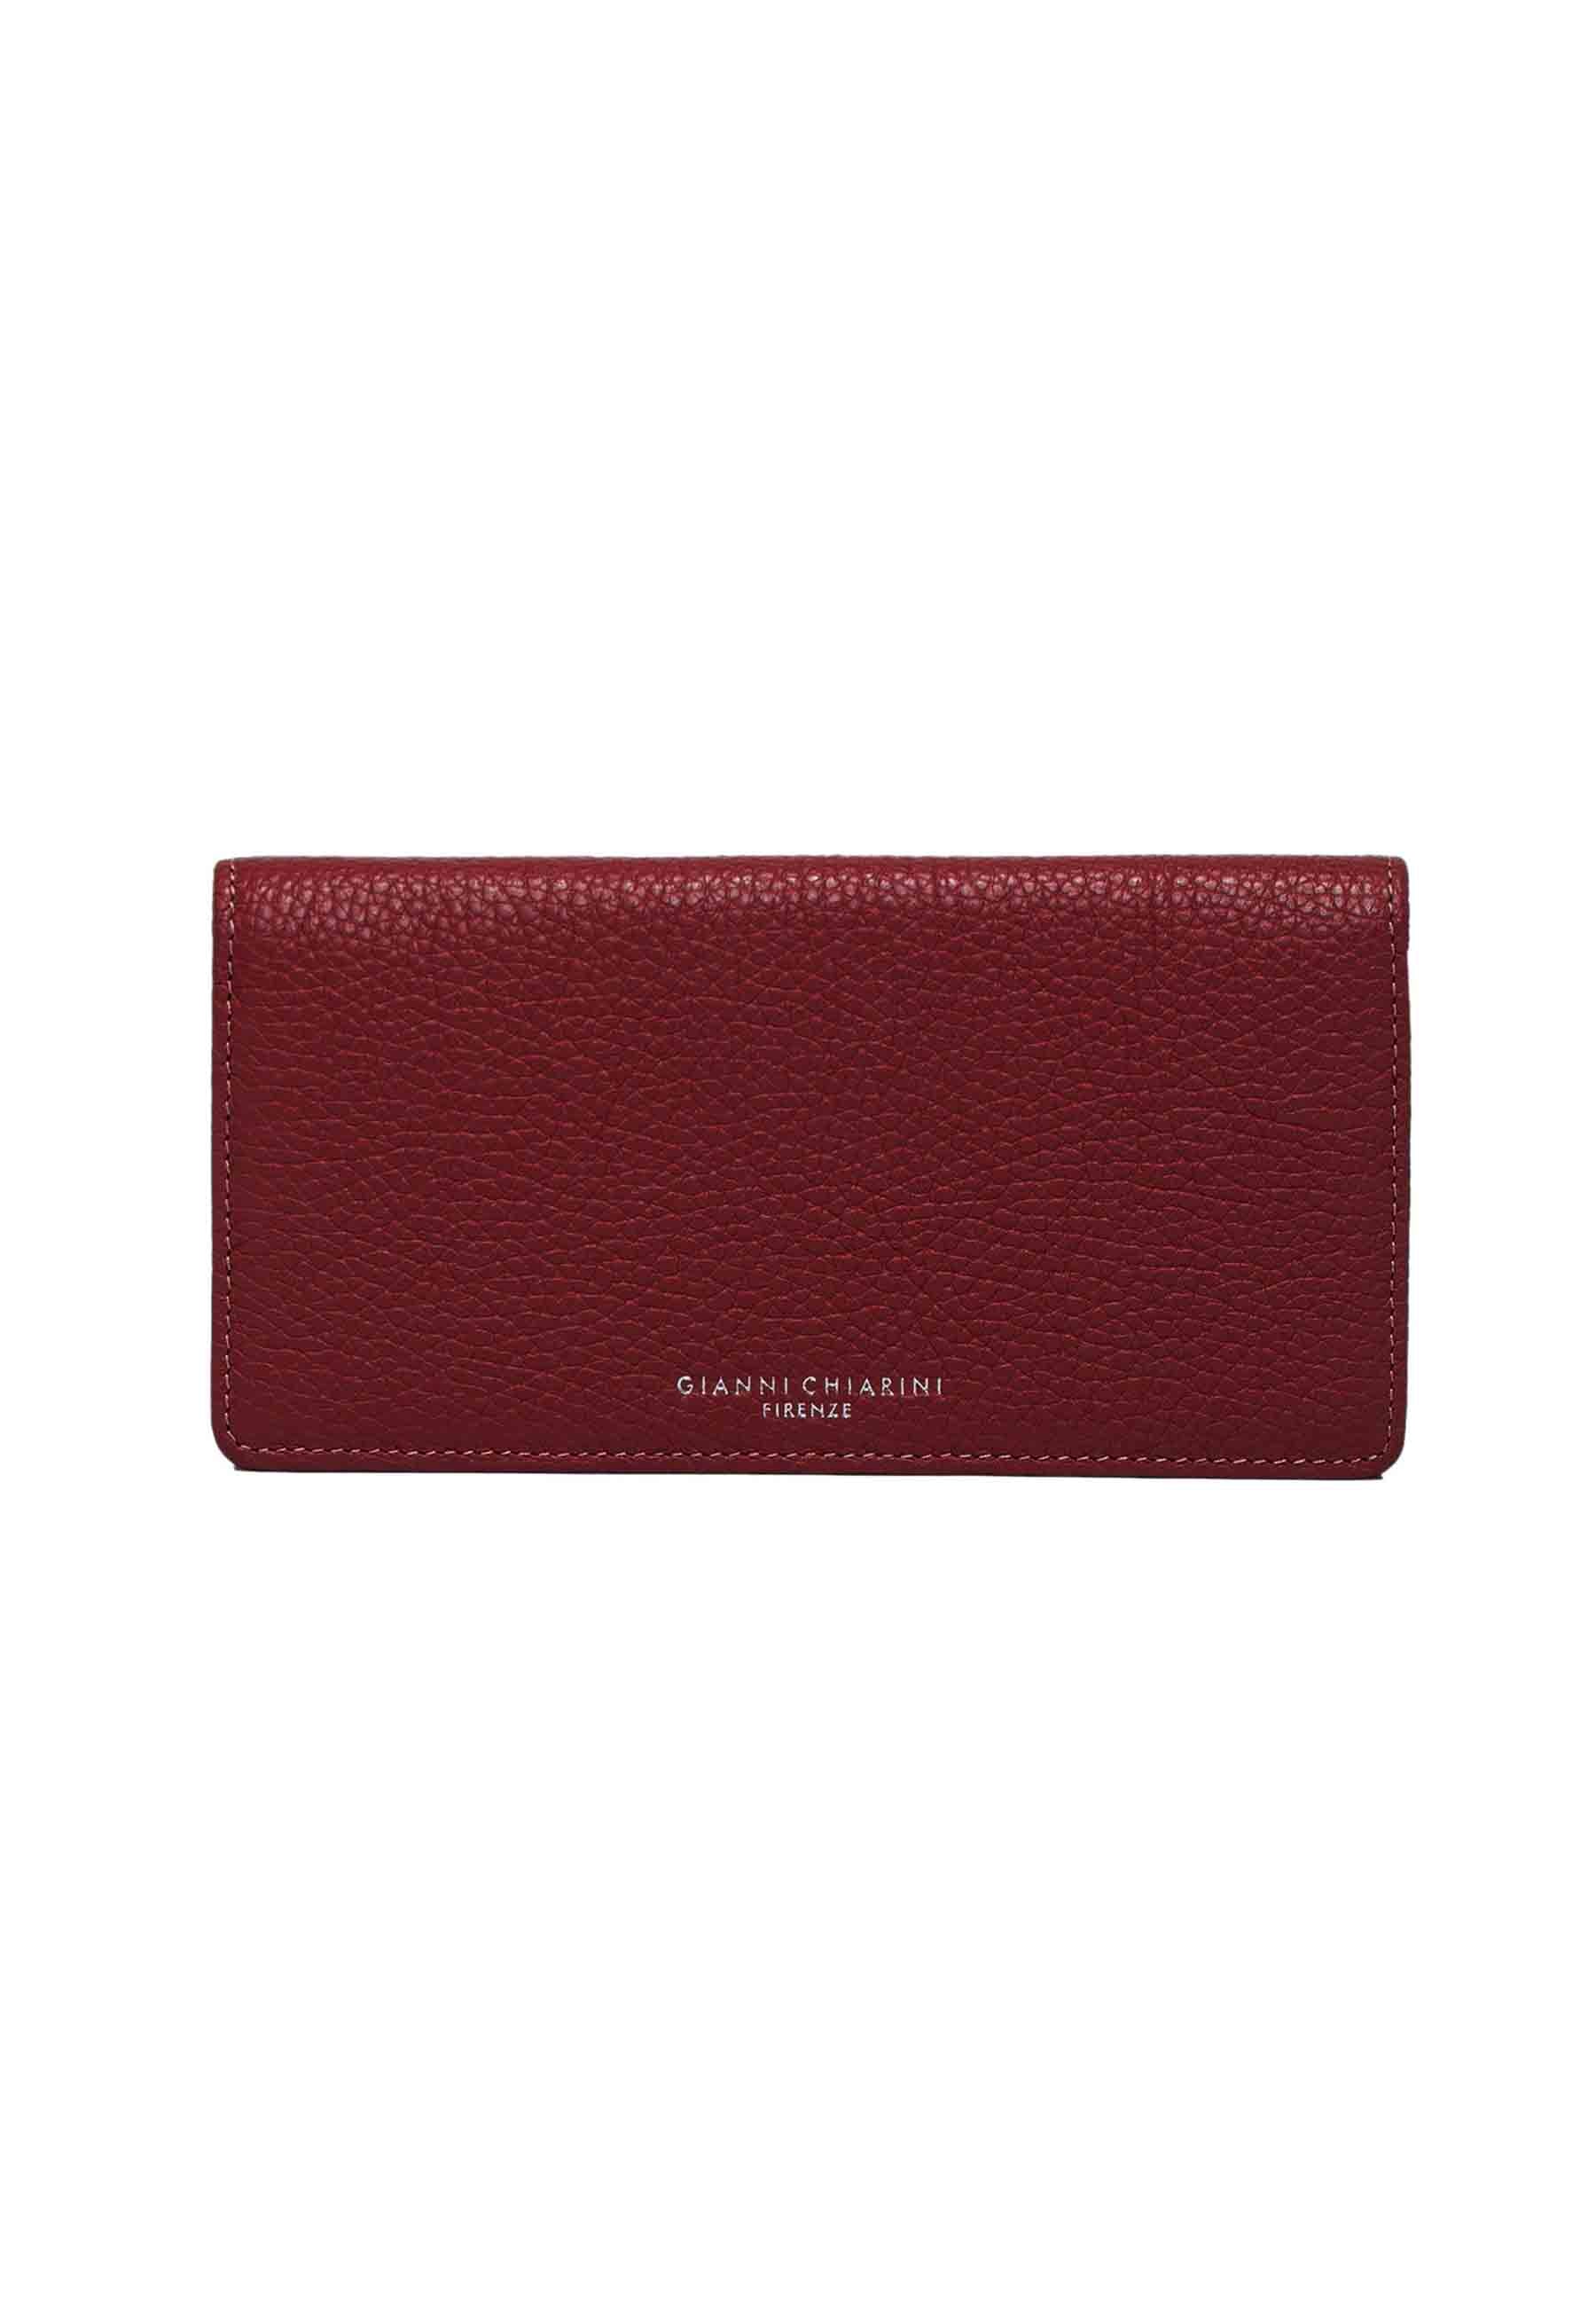 Women's wallet in burgundy hammered leather with closing button